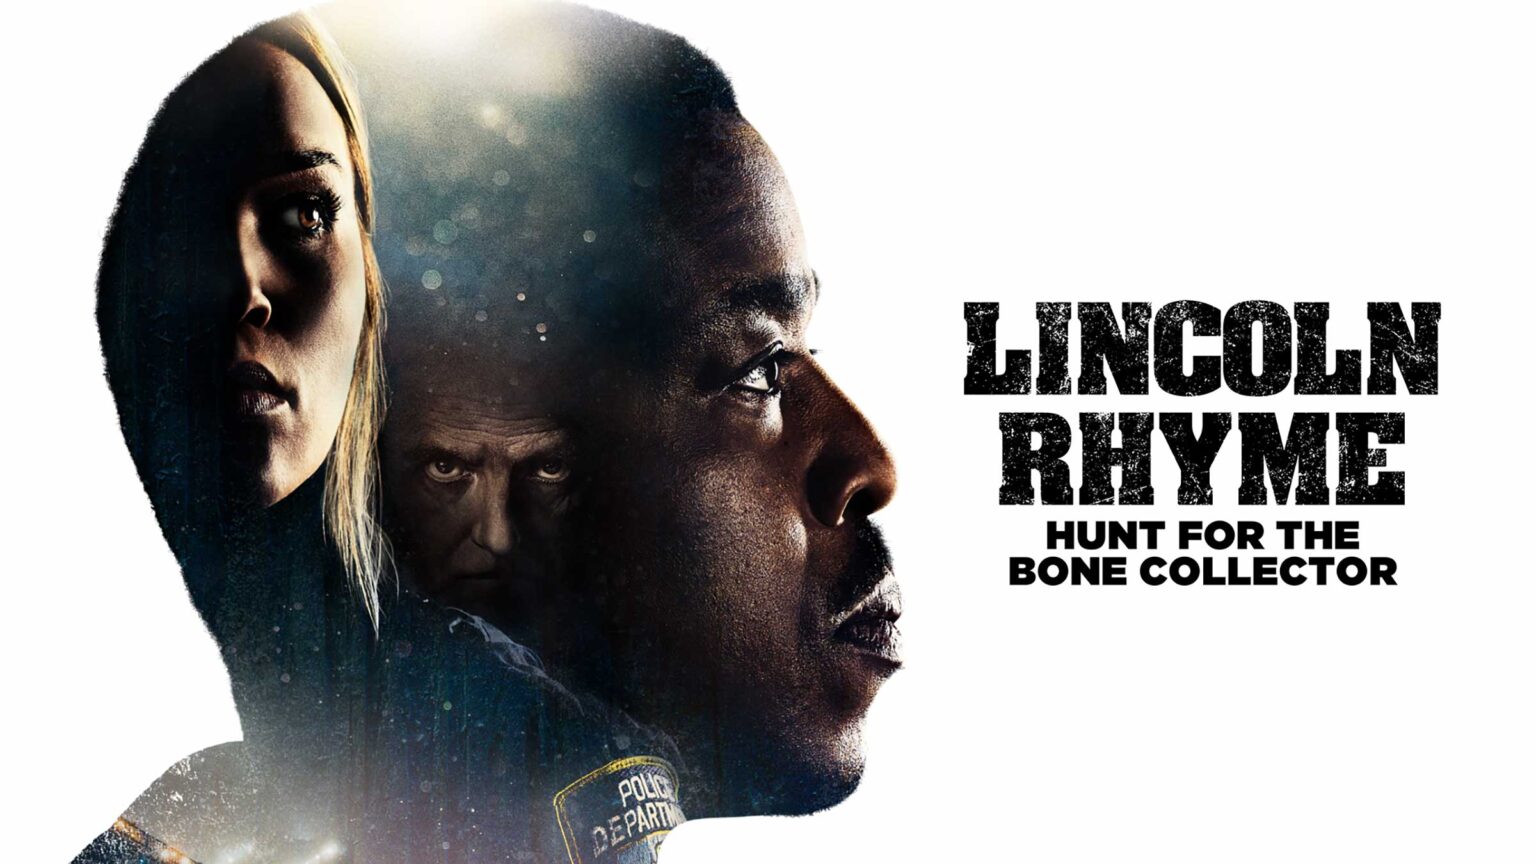 'Lincoln Rhyme: Hunt for the Bone Collector' is one such show with great representation that we’re really hoping isn’t going to be cancelled. Here's why.